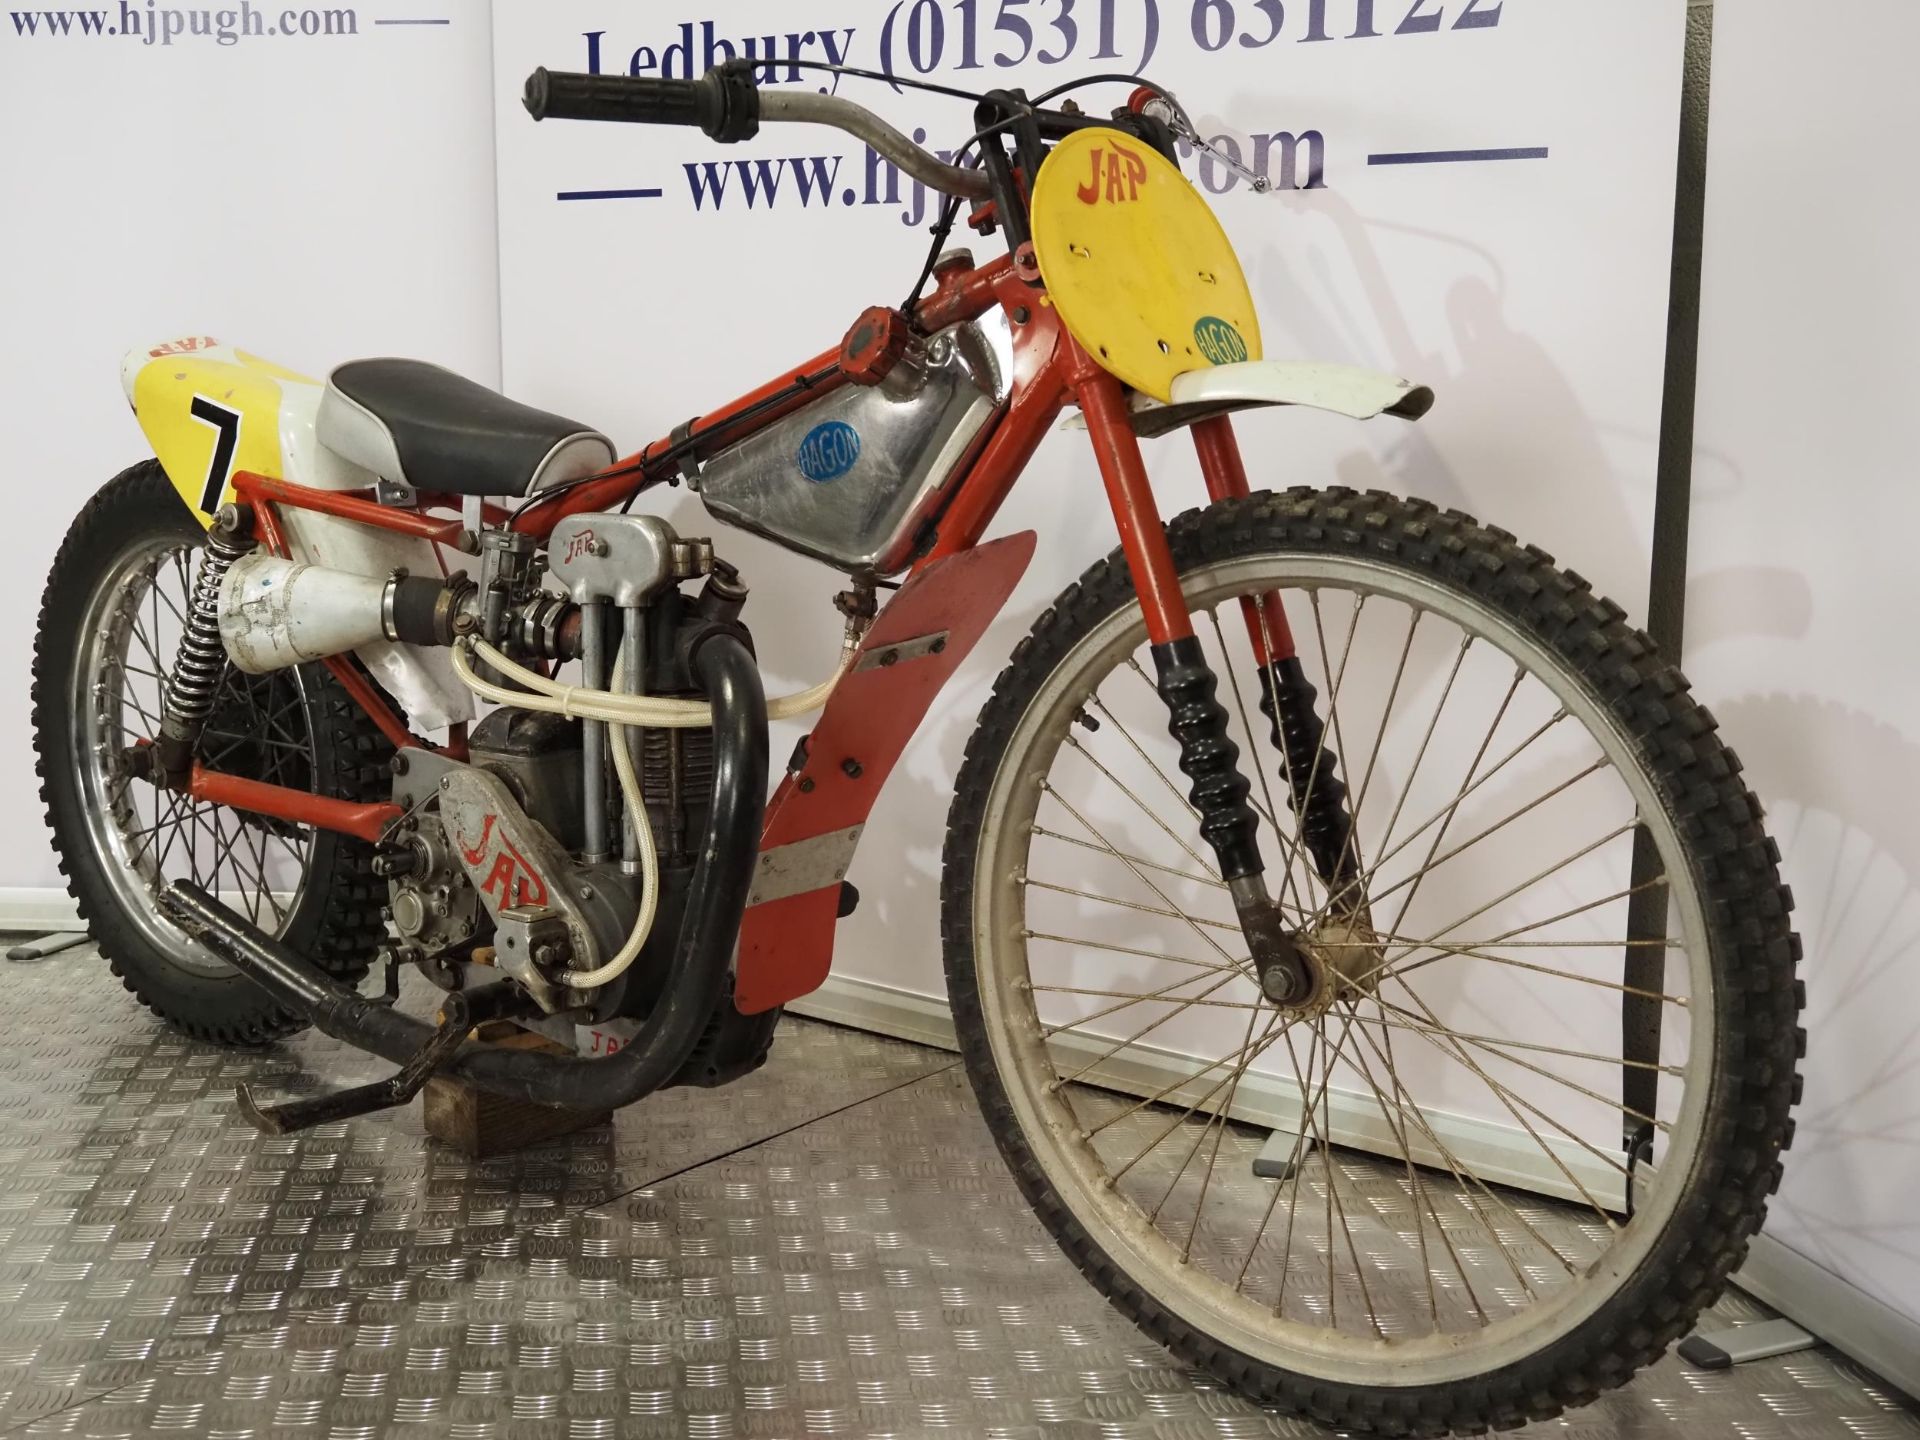 Hagon JAP grasstrack motorcycle. 1960s. 500cc. Engine No. JOS/D/77293/4 Engine turns over. Has - Image 3 of 8